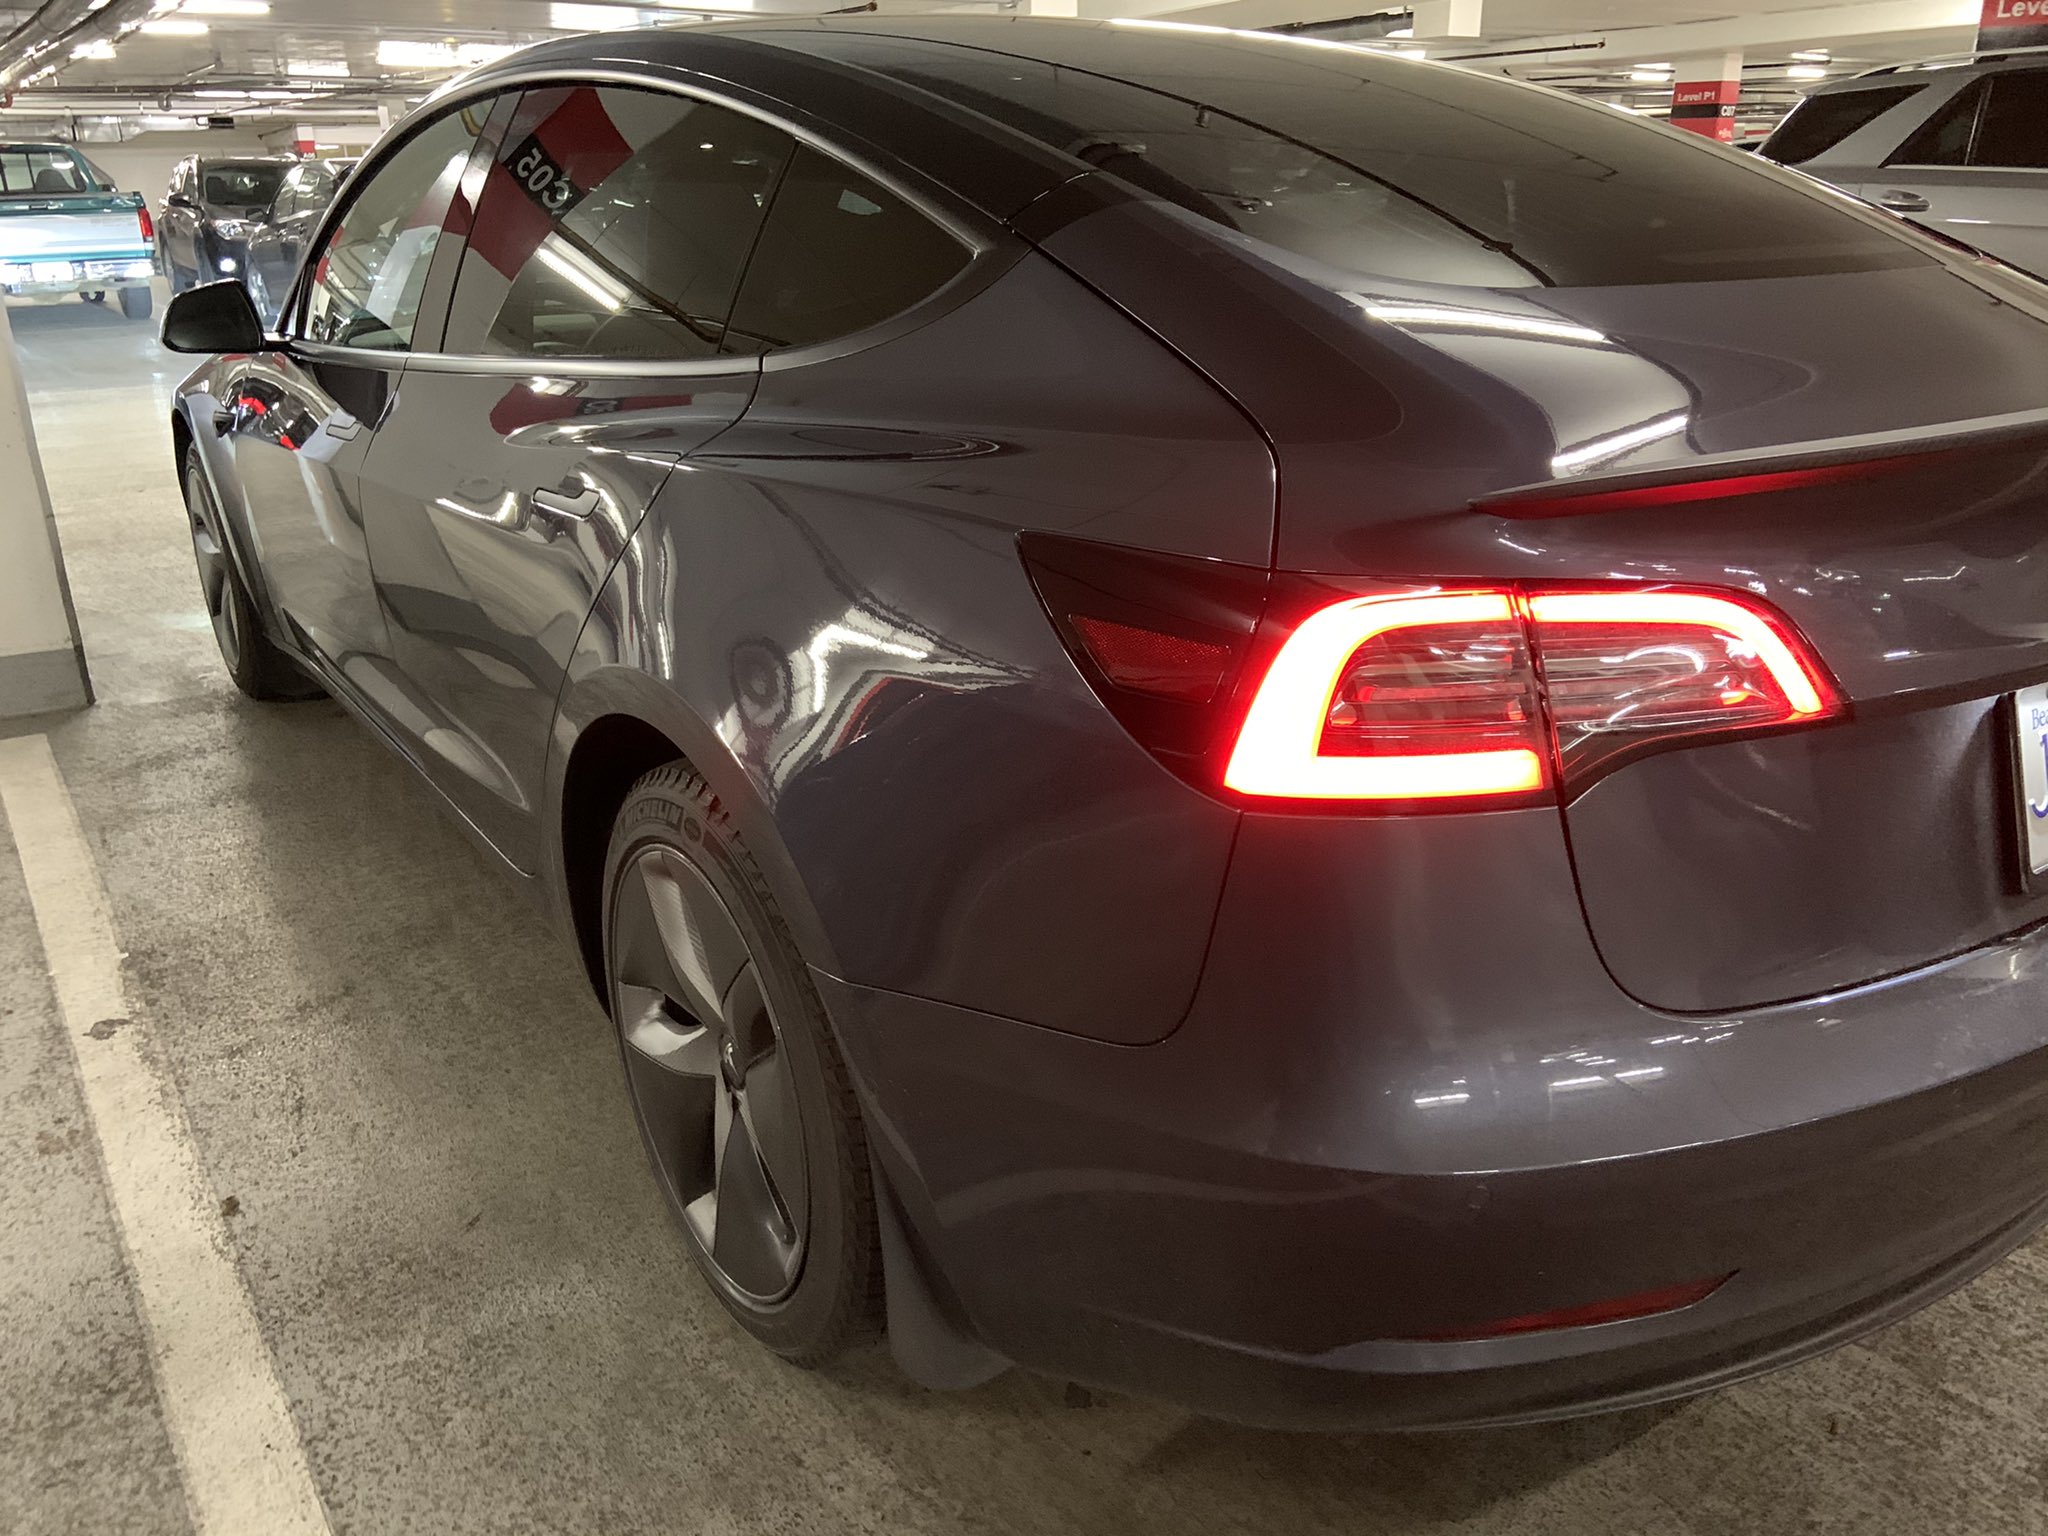 OTA recall issued for Tesla Model 3/Y tail light issue Drive Tesla